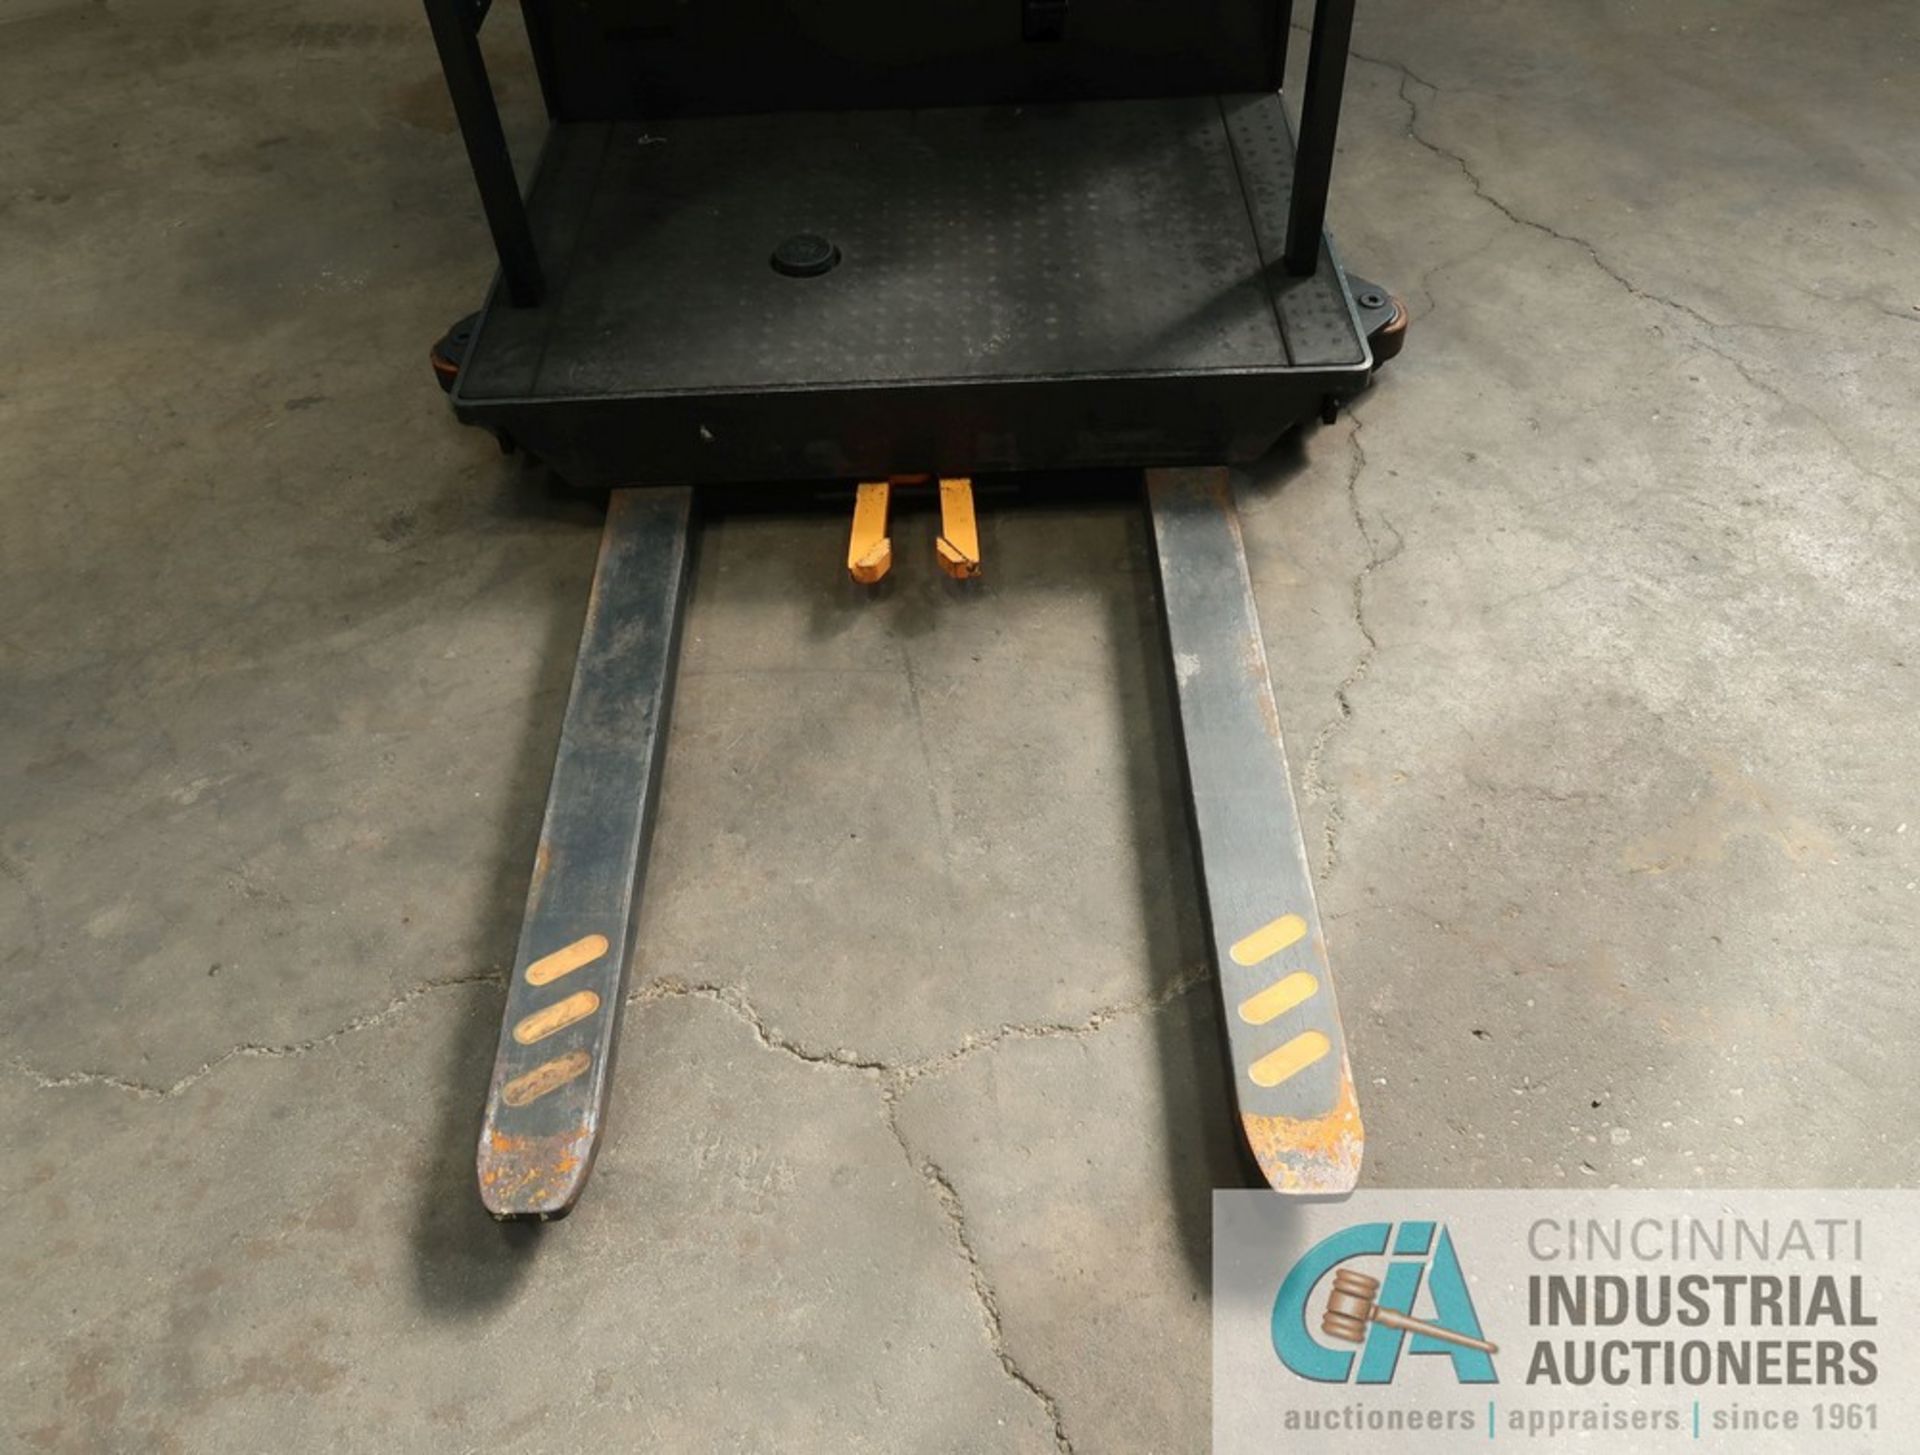 2016 CROWN MODEL SP3500 SERIES STAND-UP ELECTRIC ORDER PICKER; S/N 1A459472, 10,966 HOURS SHOWING, - Image 4 of 8